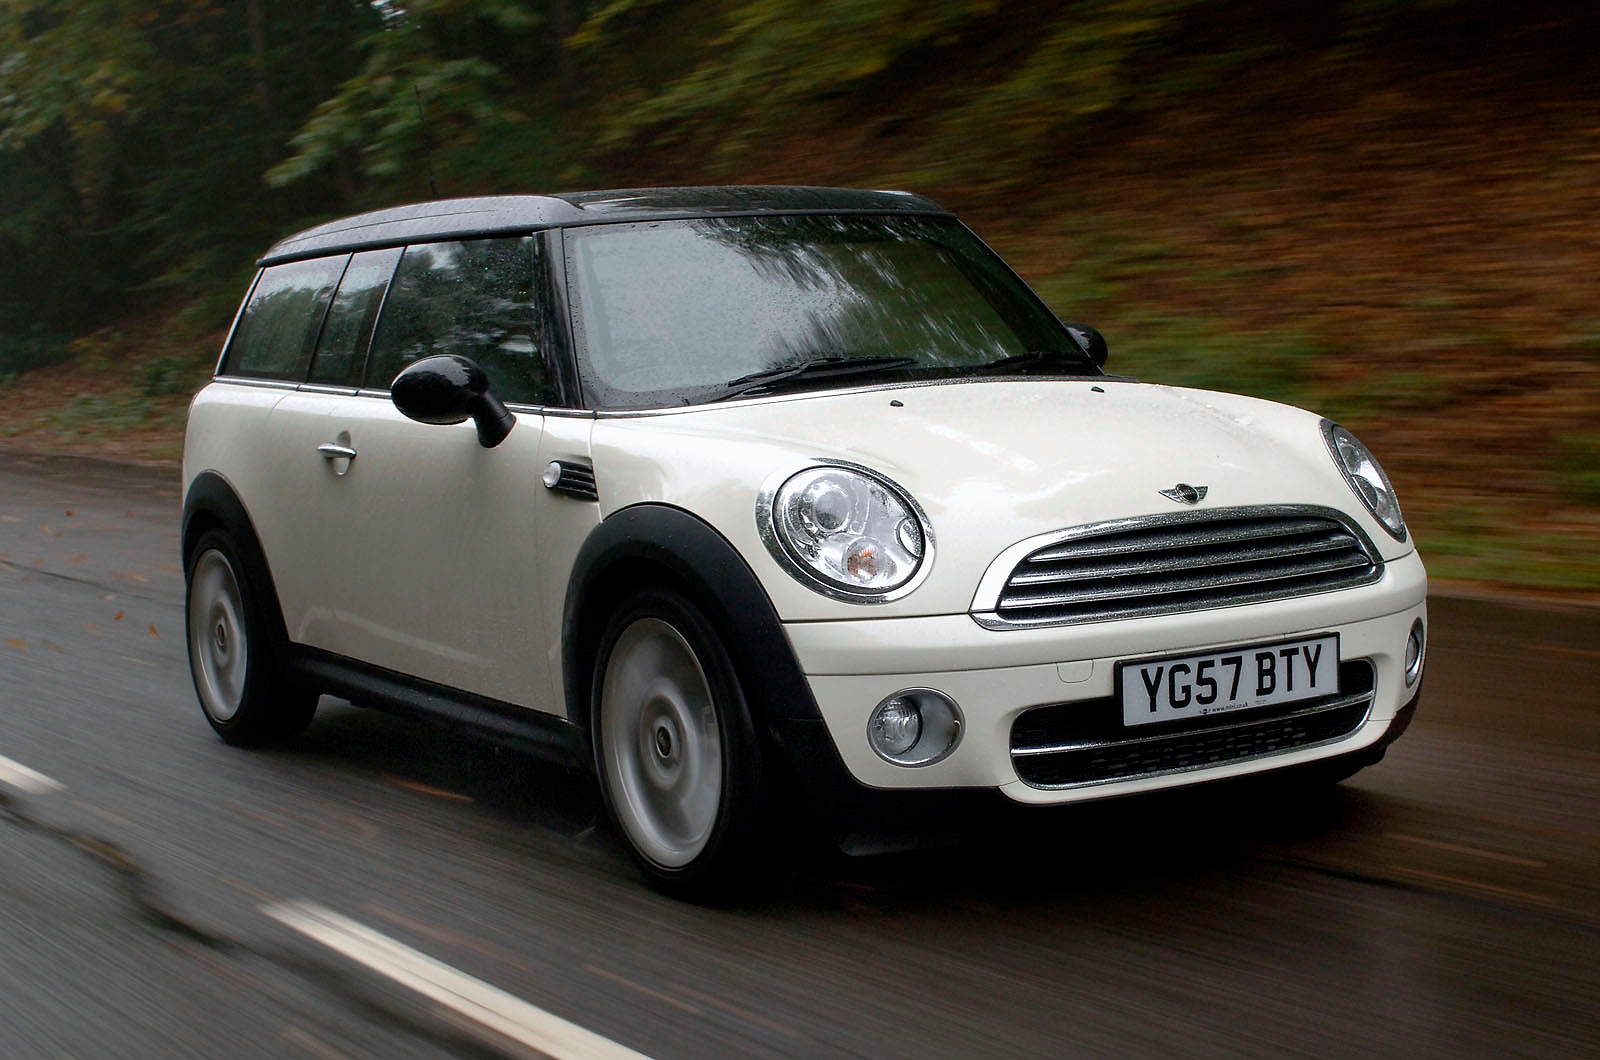 Used Mini Clubman 2007-2015 review